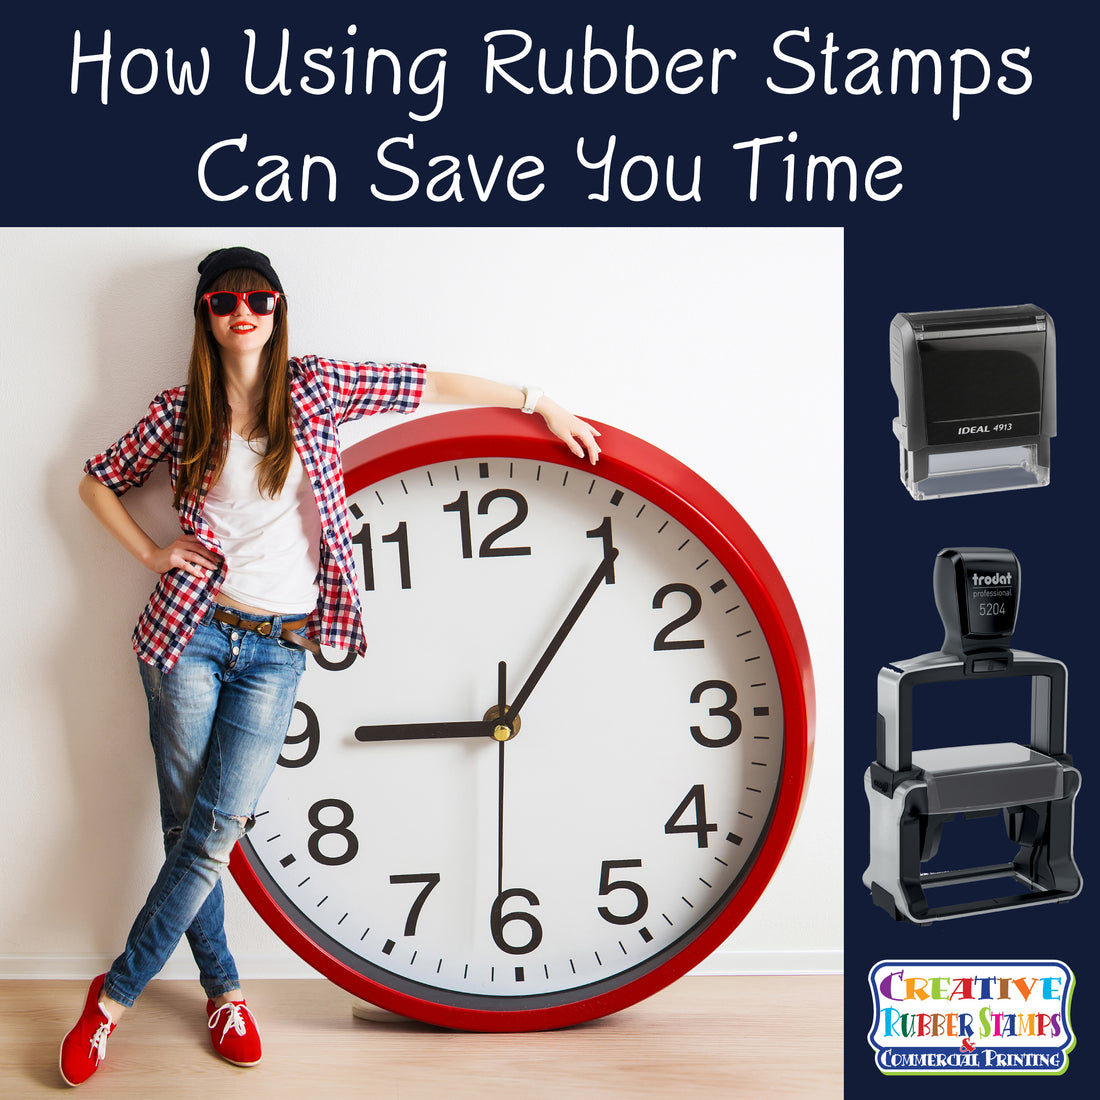 How Using Rubber Stamps Can Save You Time